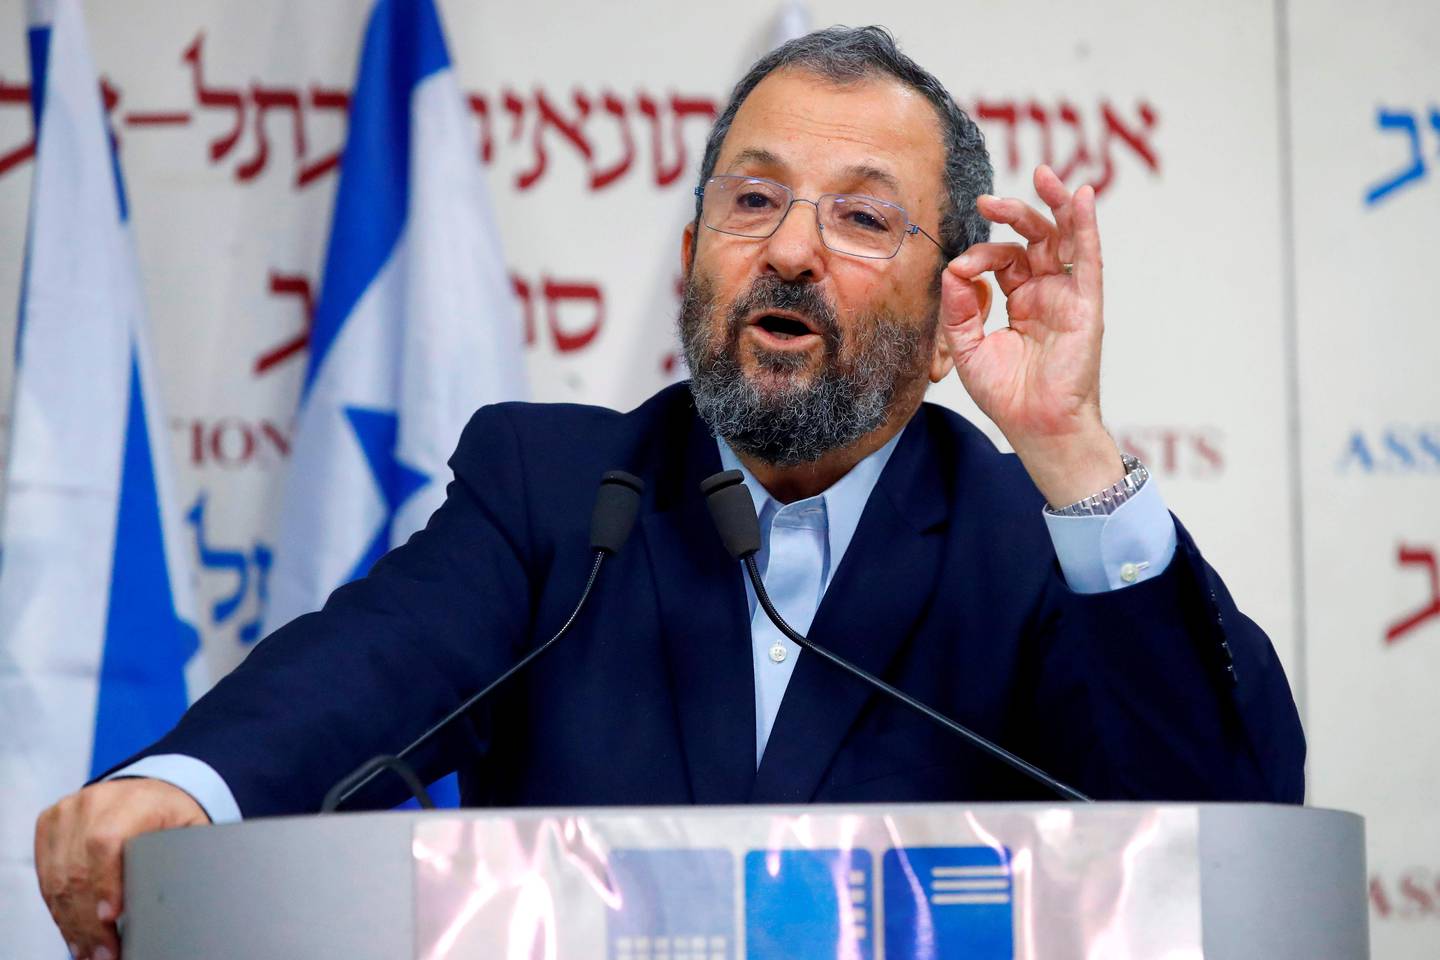 Former Israeli Prime Minister Ehud Barak holds a press conference at Beit Sokolov in Tel Aviv on June 26, 2019 to announce that he will be running in the upcoming elections in September. (Photo by JACK GUEZ / AFP)